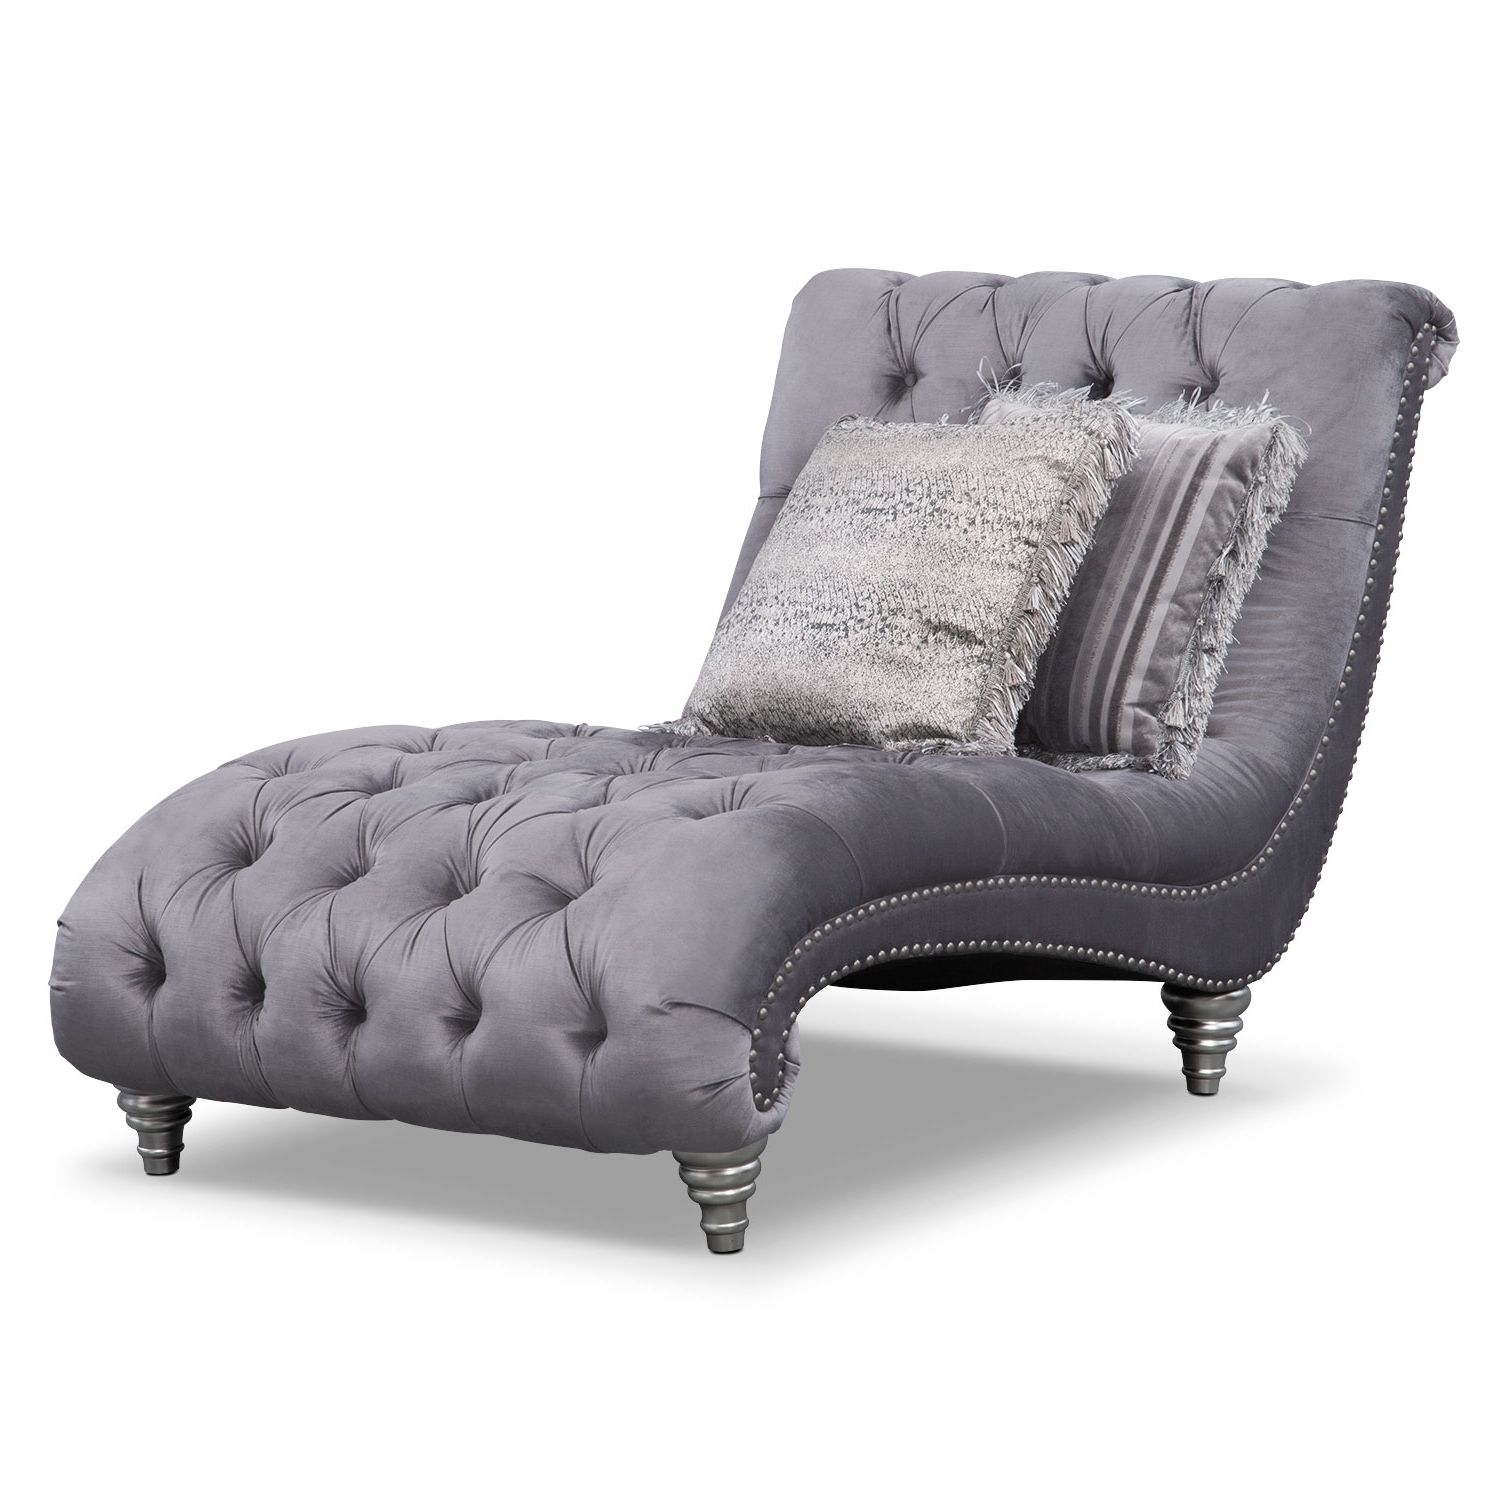 Gorgeous Gray Chaise Lounge With Brilliant Chaise Lounges American Regarding Latest Cheap Chaise Lounges (Photo 13 of 15)